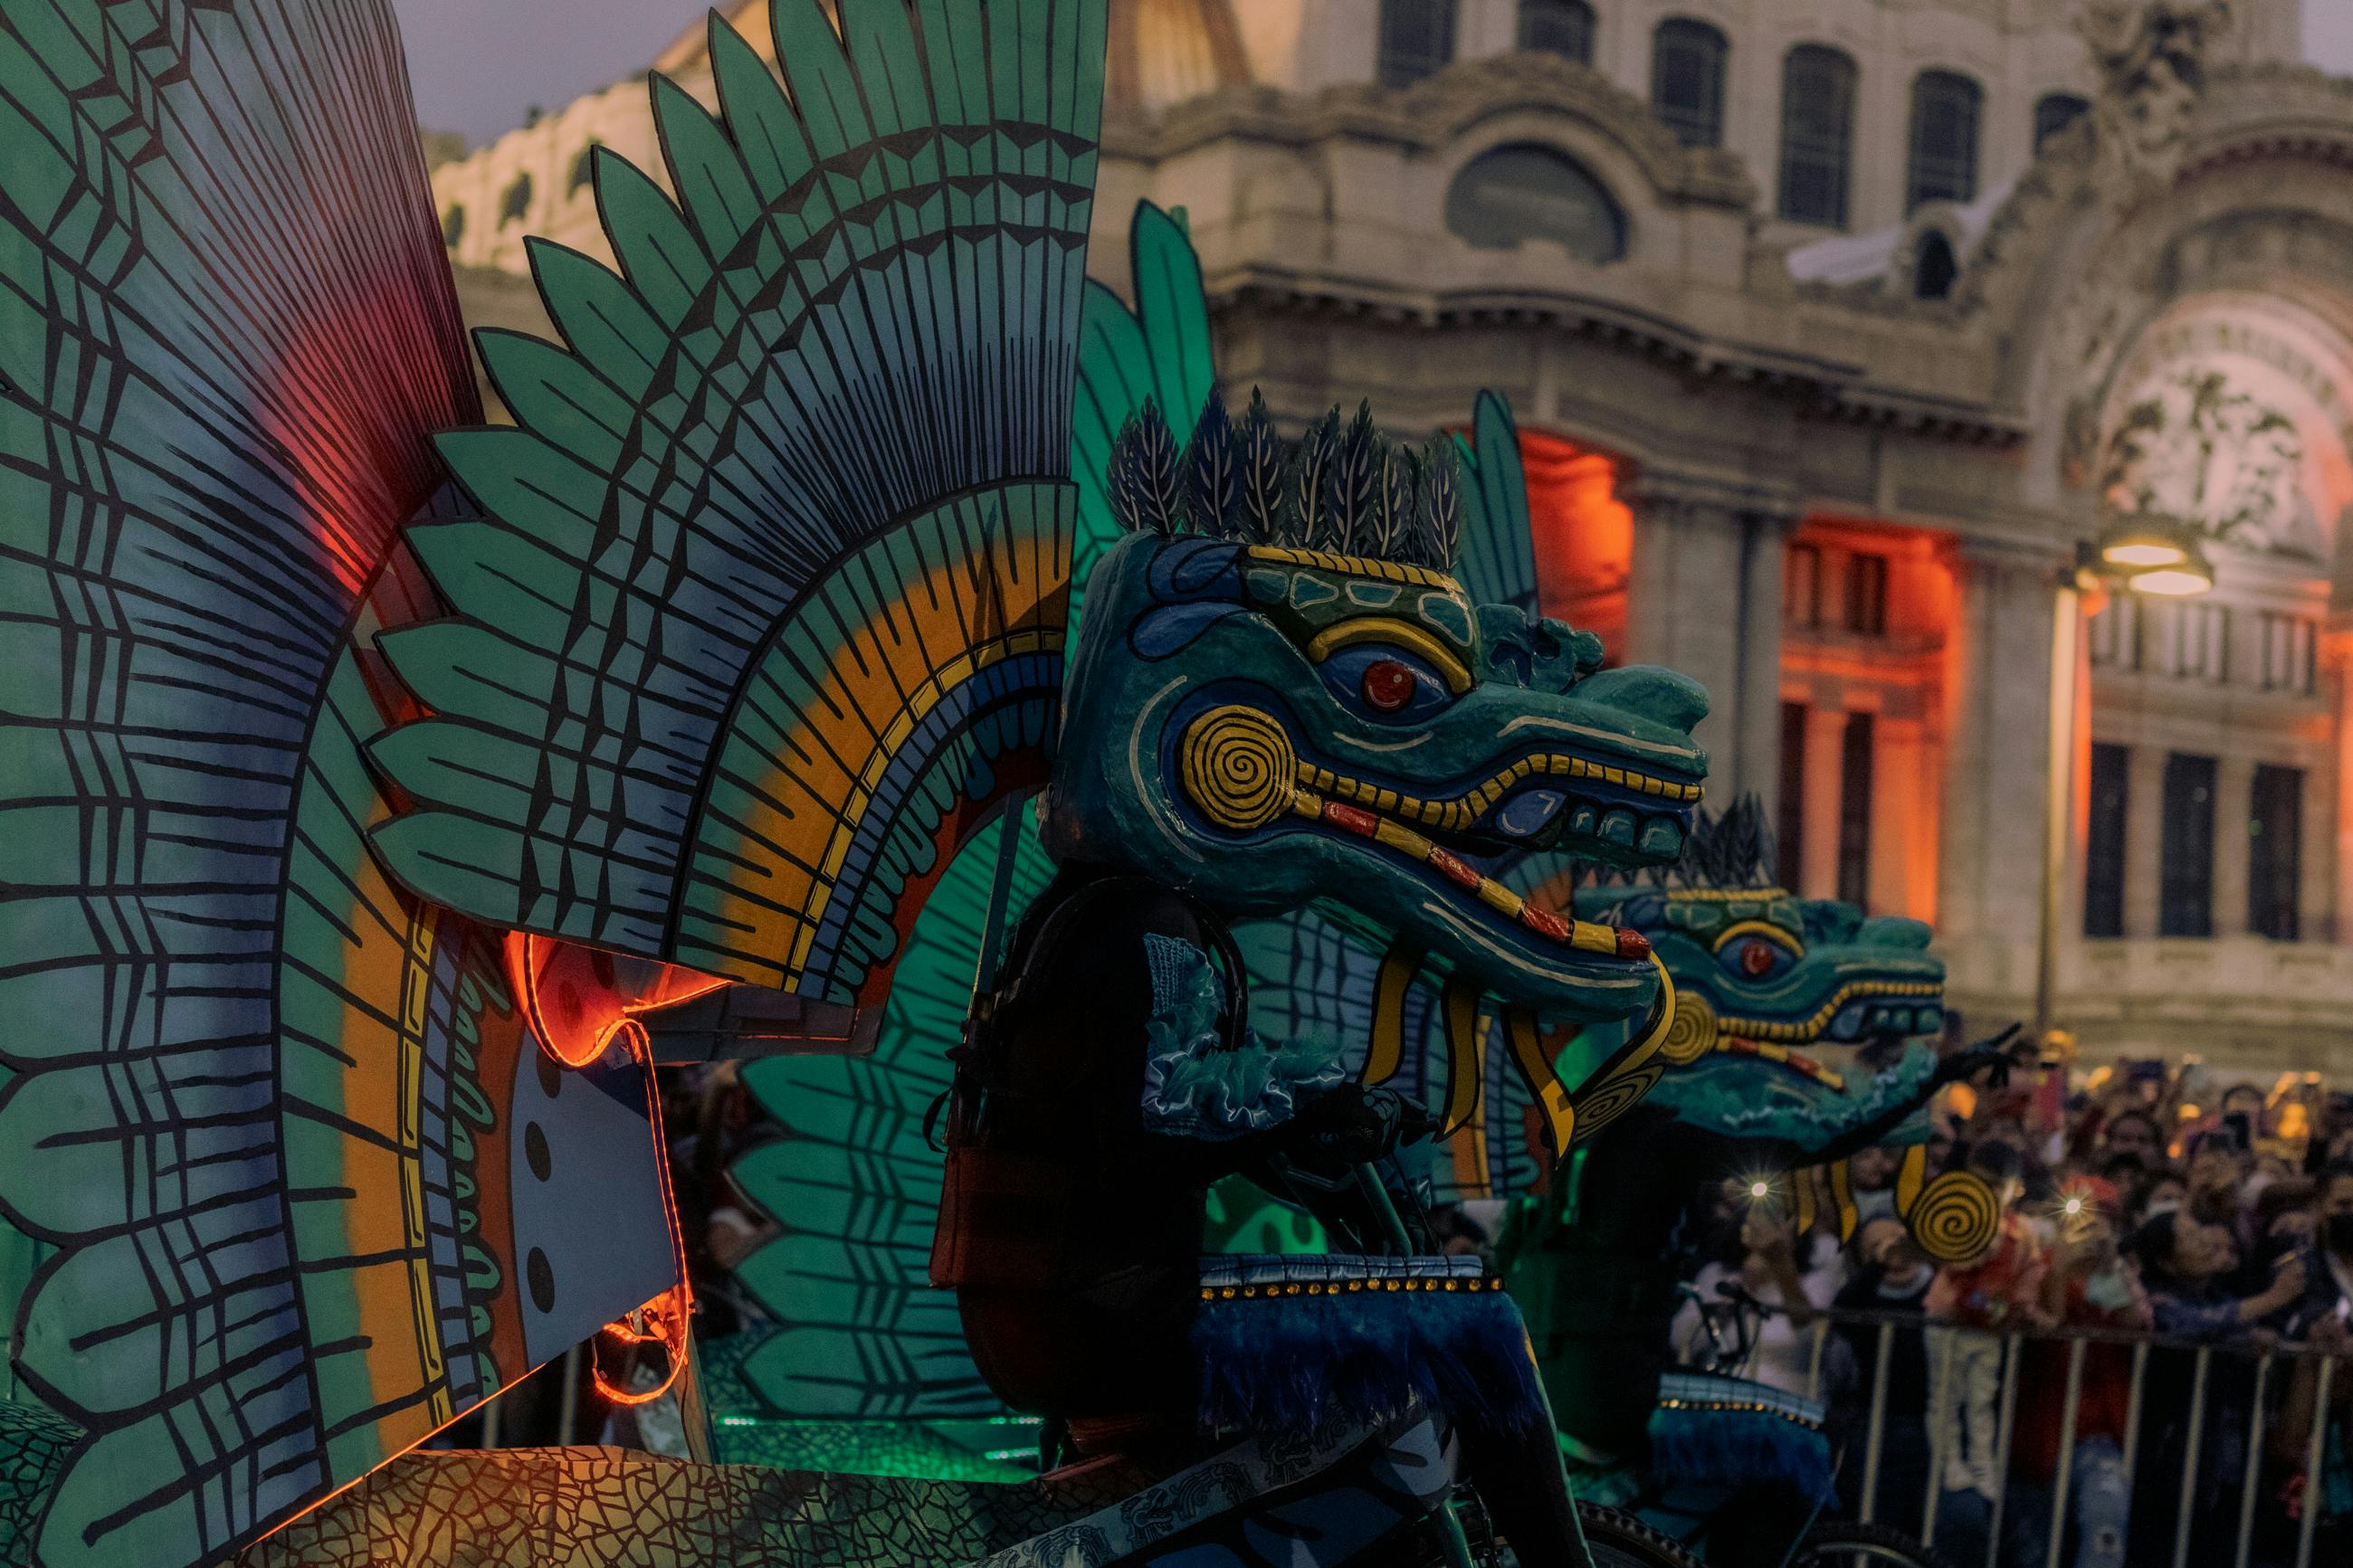 blue green and red dragon statue